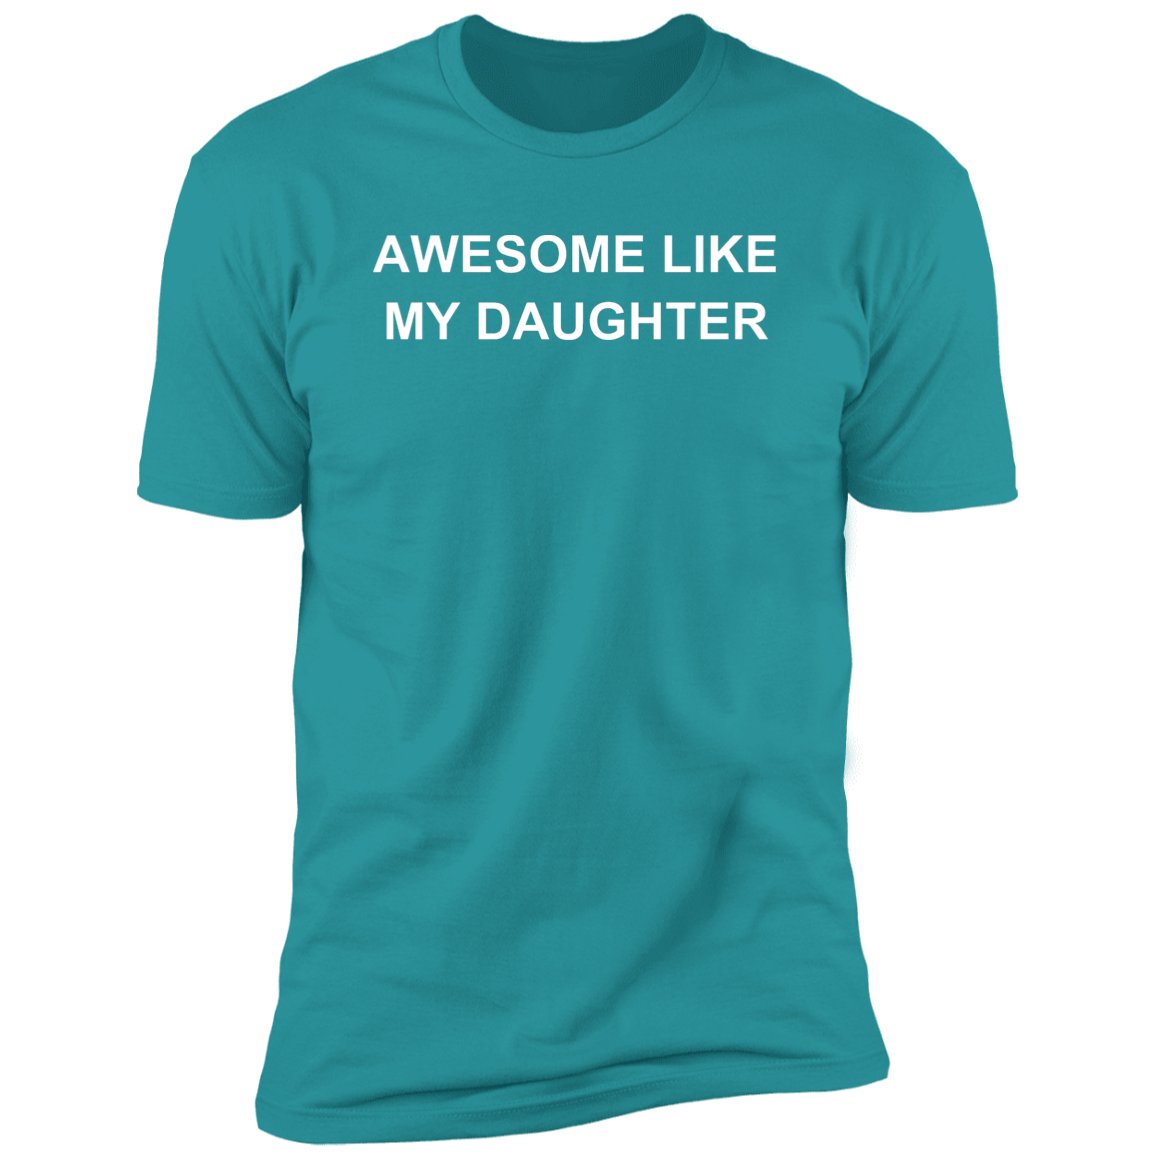 Awesome Like My Daughter T-Shirt